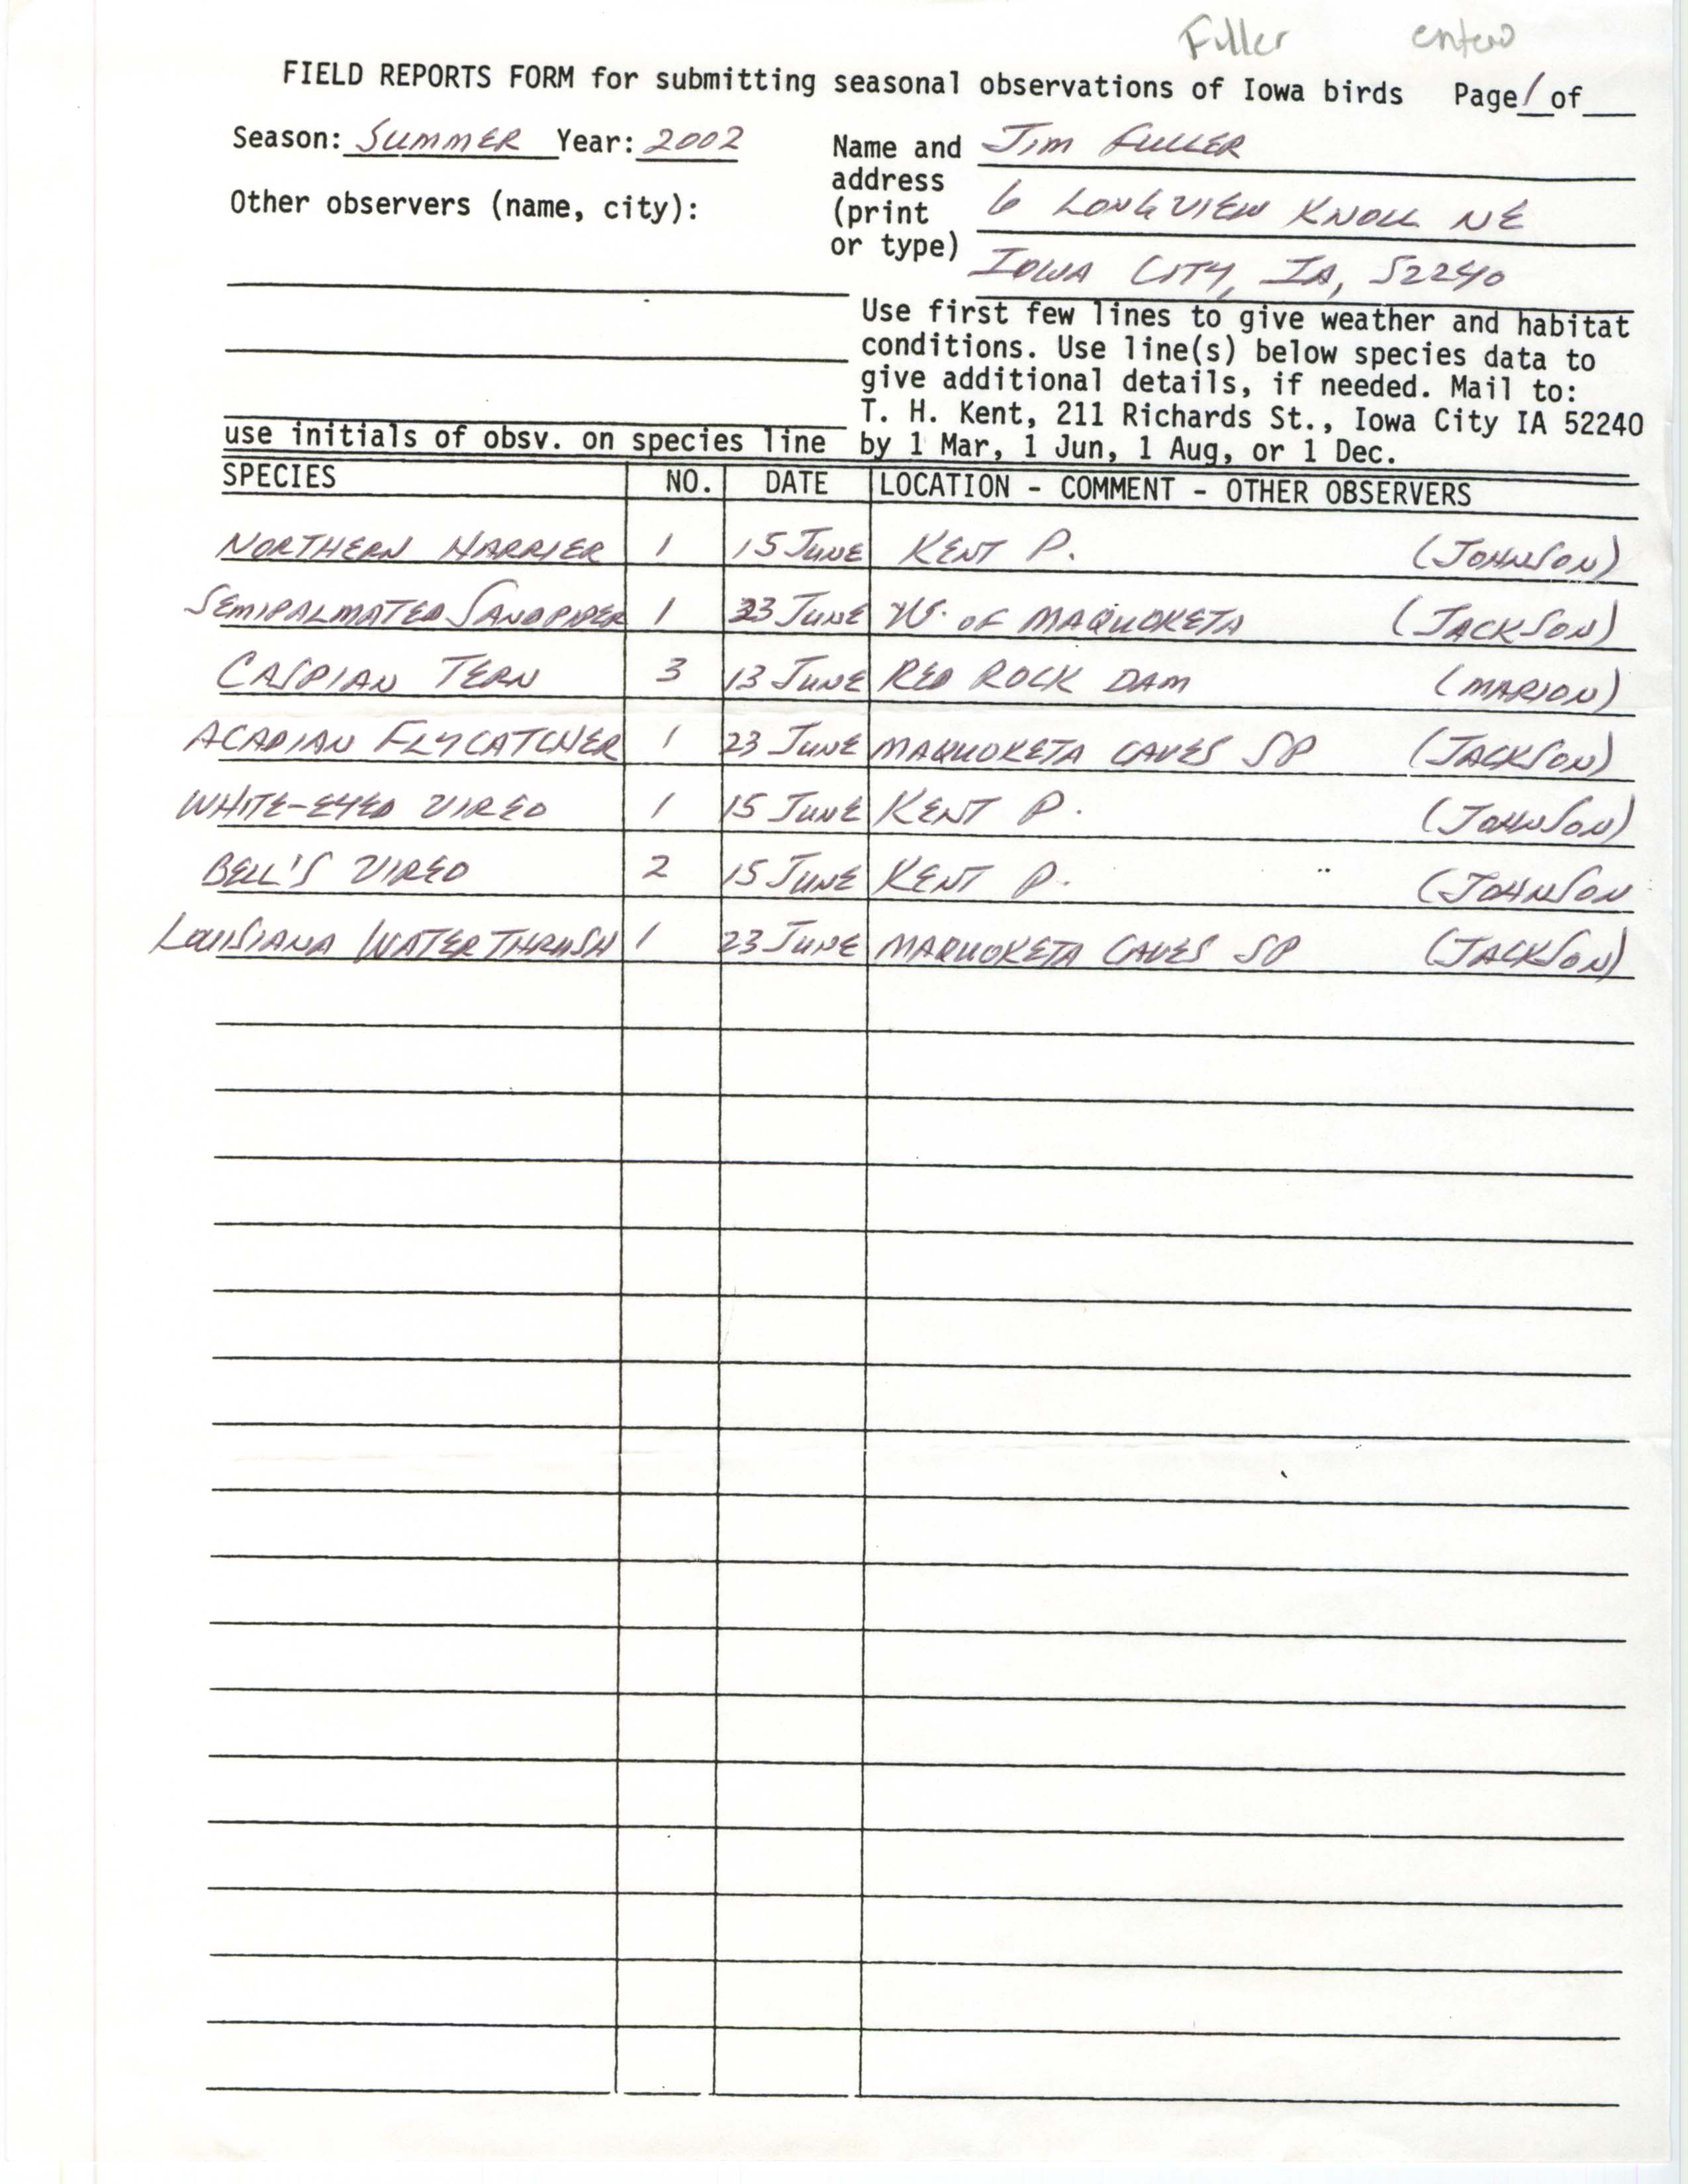 Field reports form for submitting seasonal observations of Iowa birds, James L. Fuller, summer 2002